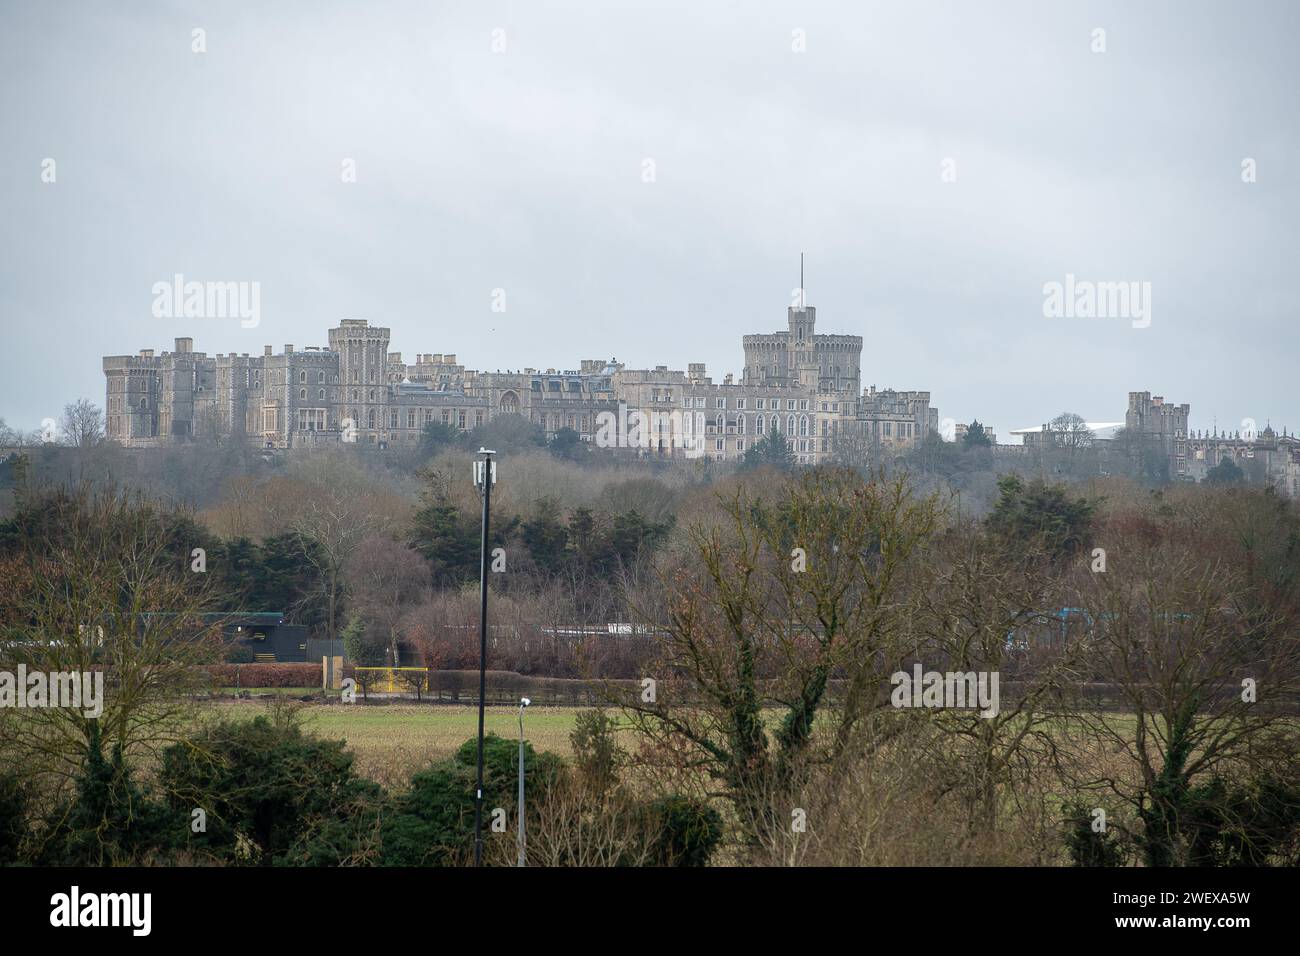 Datchet, UK. 25th January, 2024. Views of Windsor Castle, Berkshire. HRH, Catherine, The Princess of Wales is currently in London in hospital recovering from reported abdominal surgery. The Princess, often still called by her maiden name, Kate Middleton, is expected to return home to her house in the grounds of Windsor Castle within a fortnight. Her Royal visits have been cancelled until Easter. William, the Prince of Wales has also cancelled his Royal appointments. Credit: Maureen McLean/Alamy Stock Photo